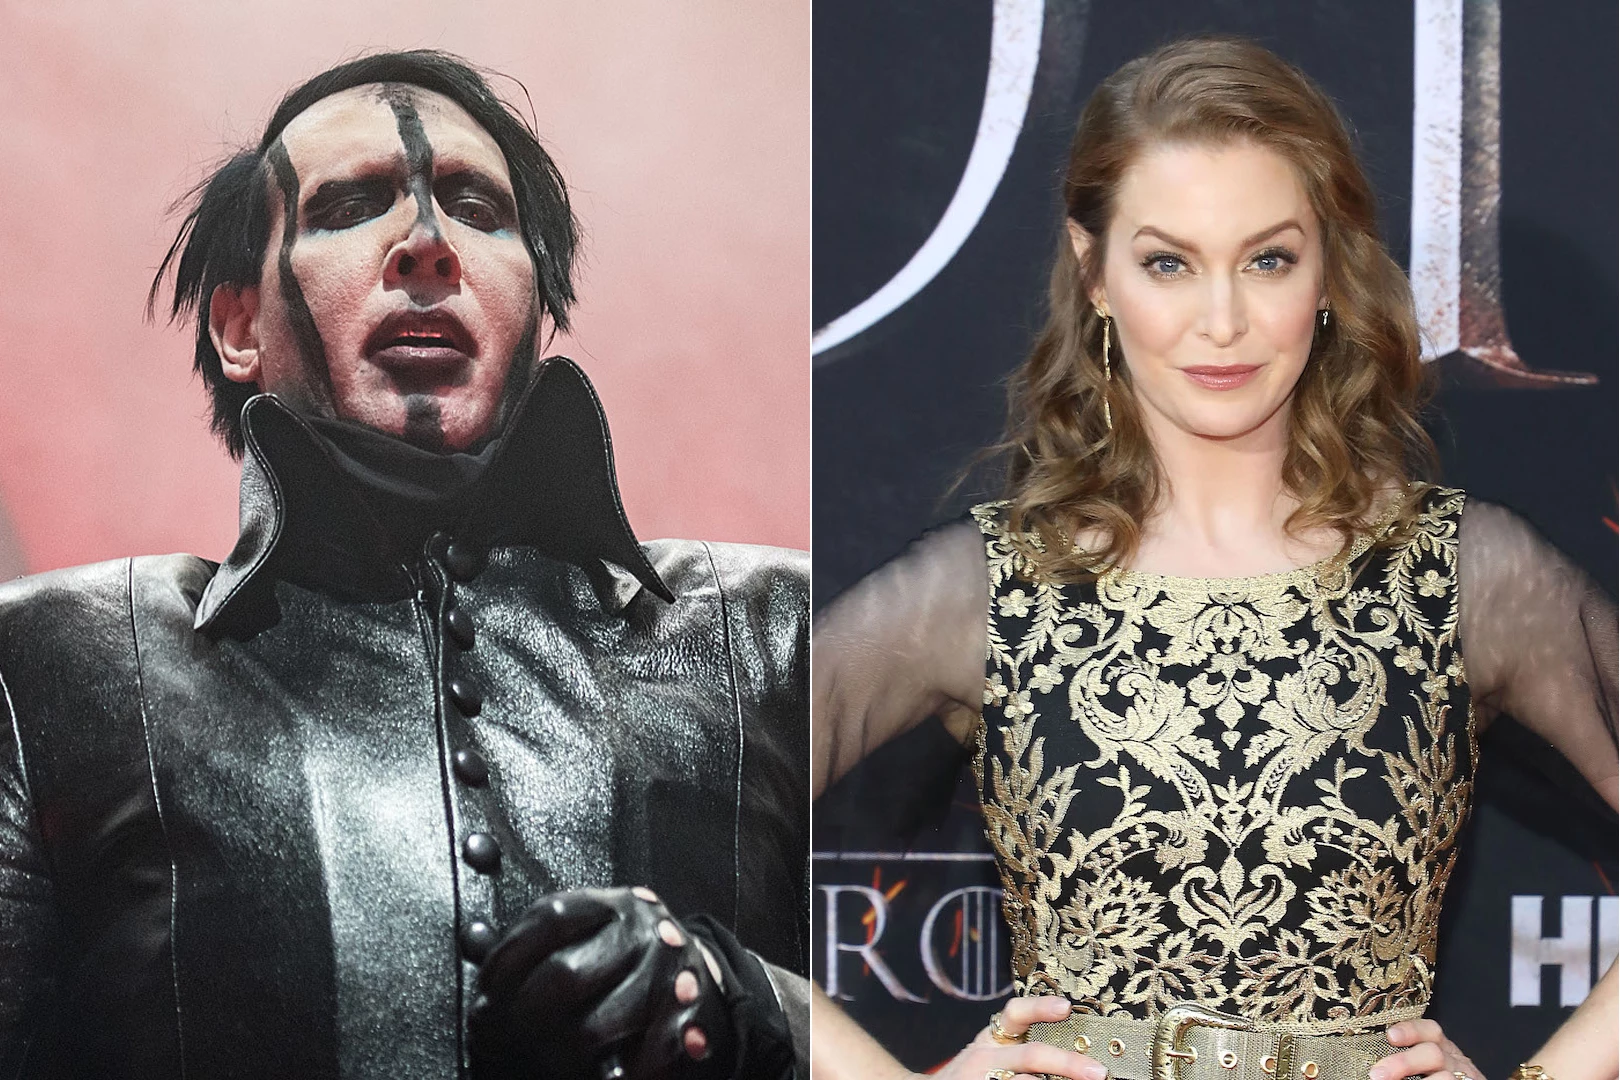 Give Blank Skru ned Game of Thrones' Actress Details Graphic Abuse by Marilyn Manson